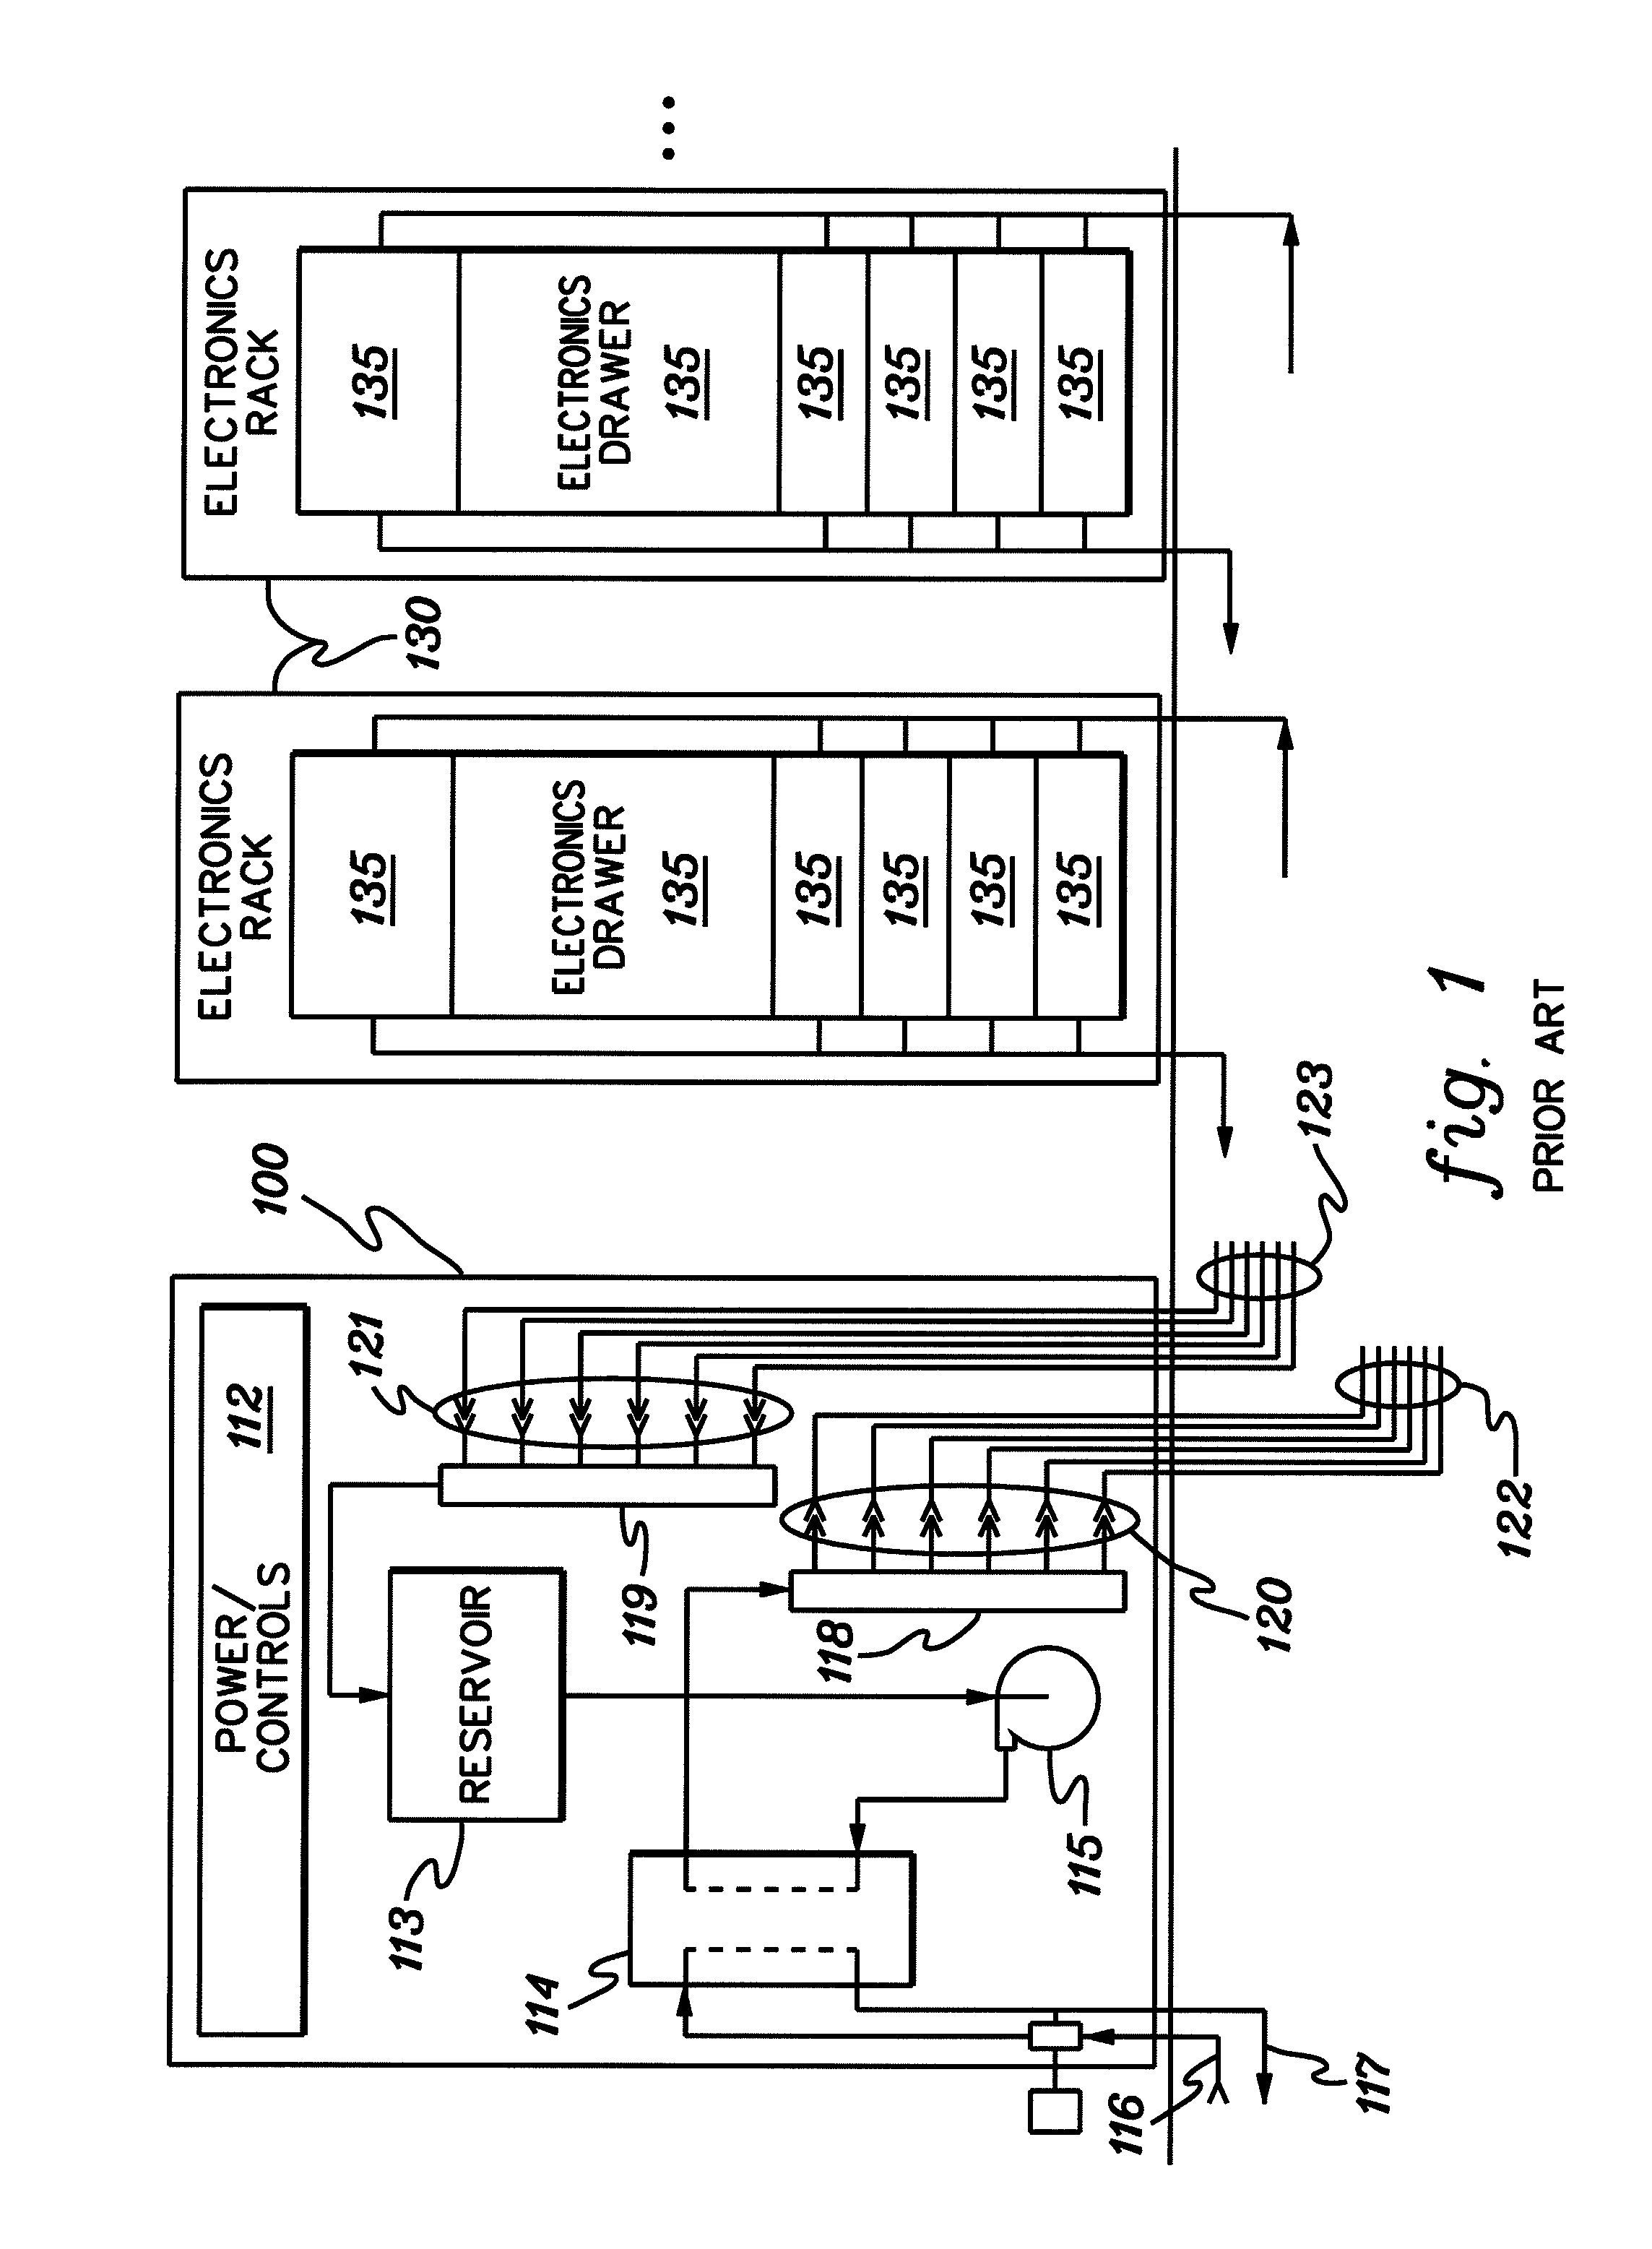 Cooling apparatuses and methods employing discrete cold plates compliantly coupled between a common manifold and electronics components of an assembly to be cooled